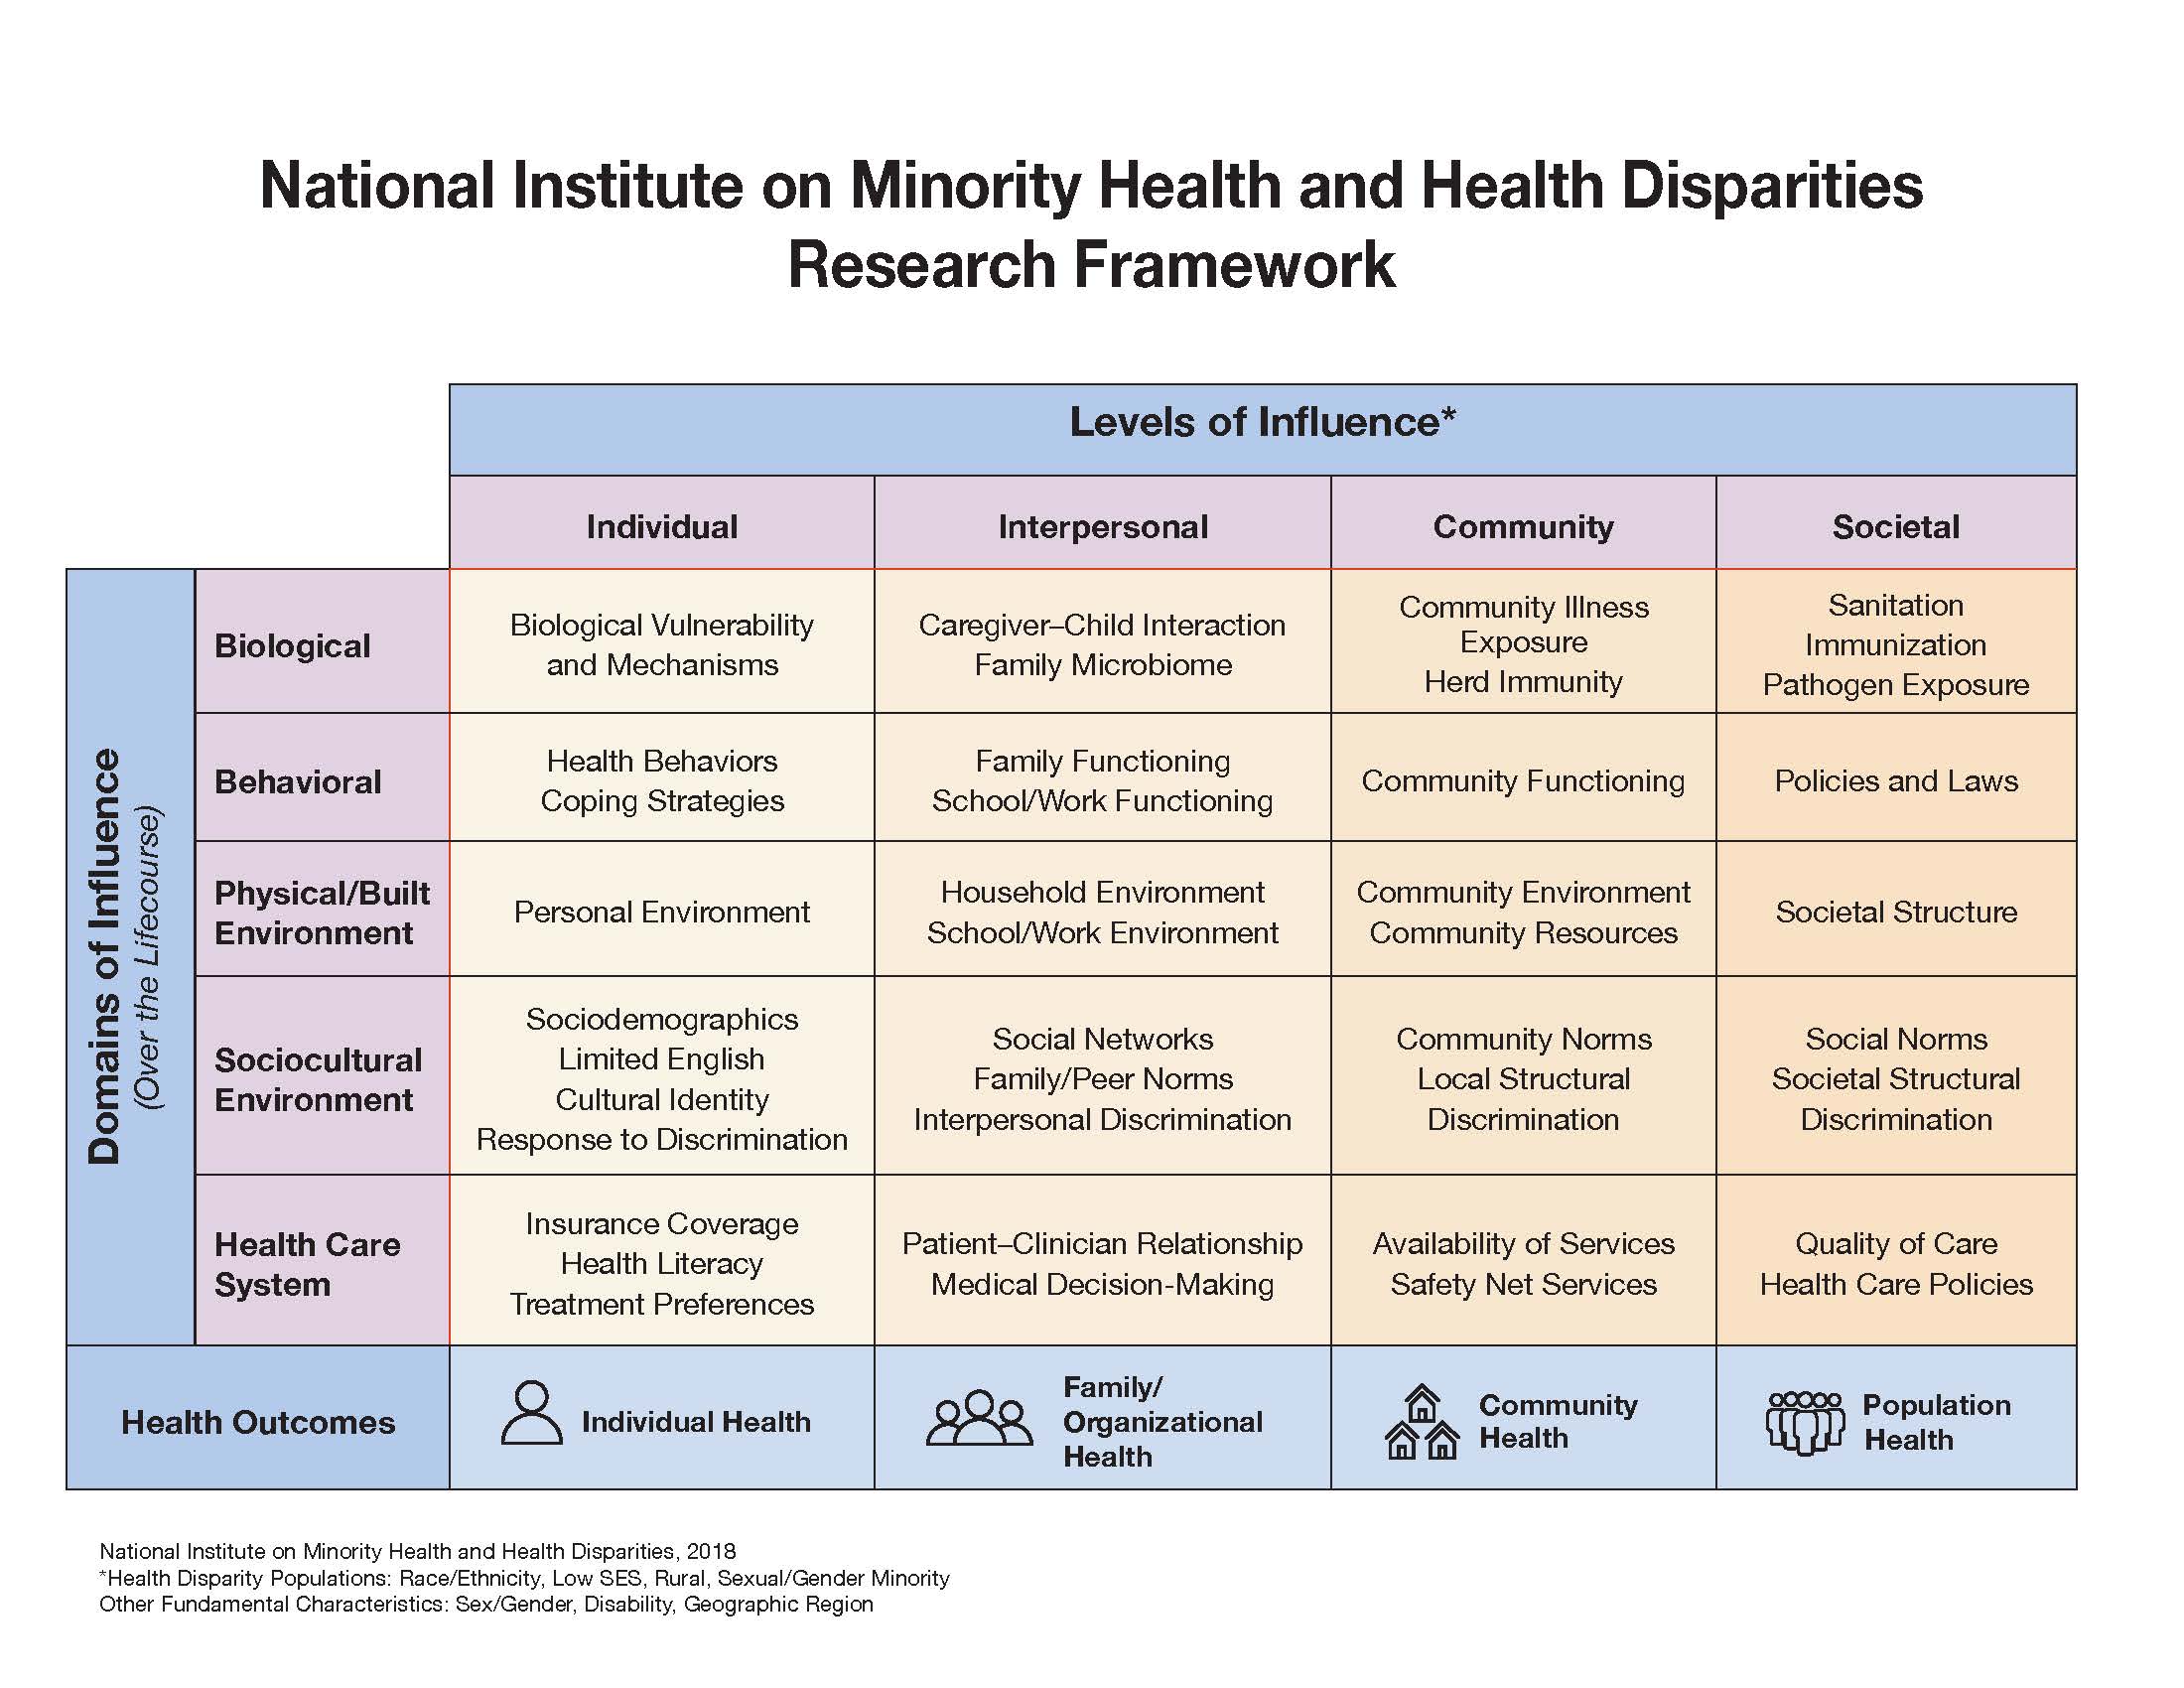 research framework is